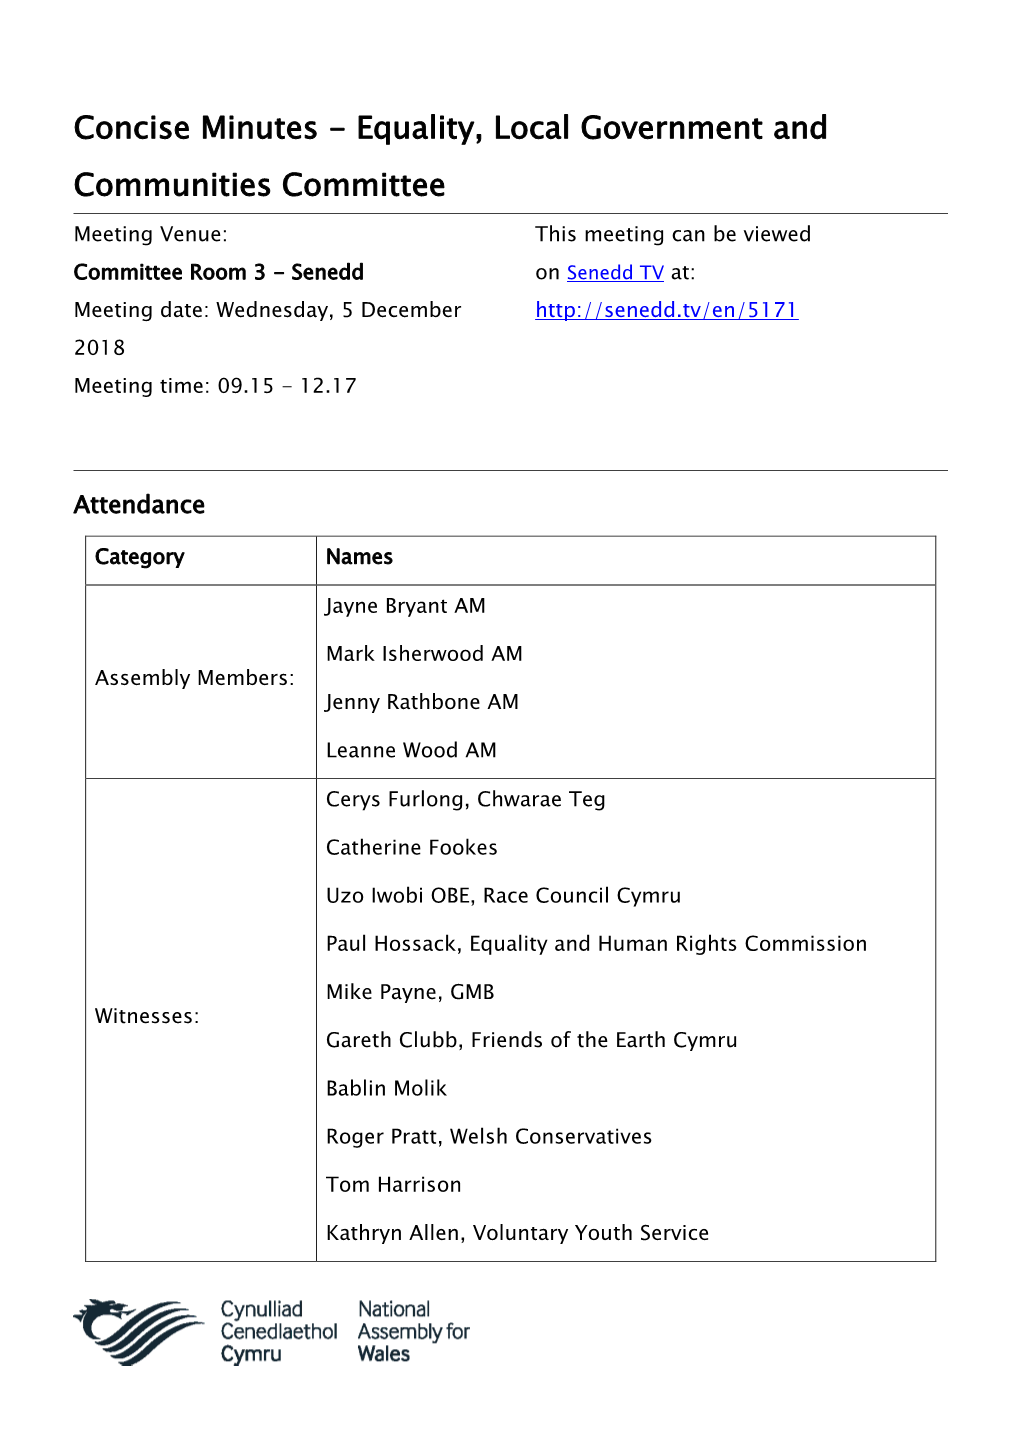 Concise Minutes - Equality, Local Government and Communities Committee